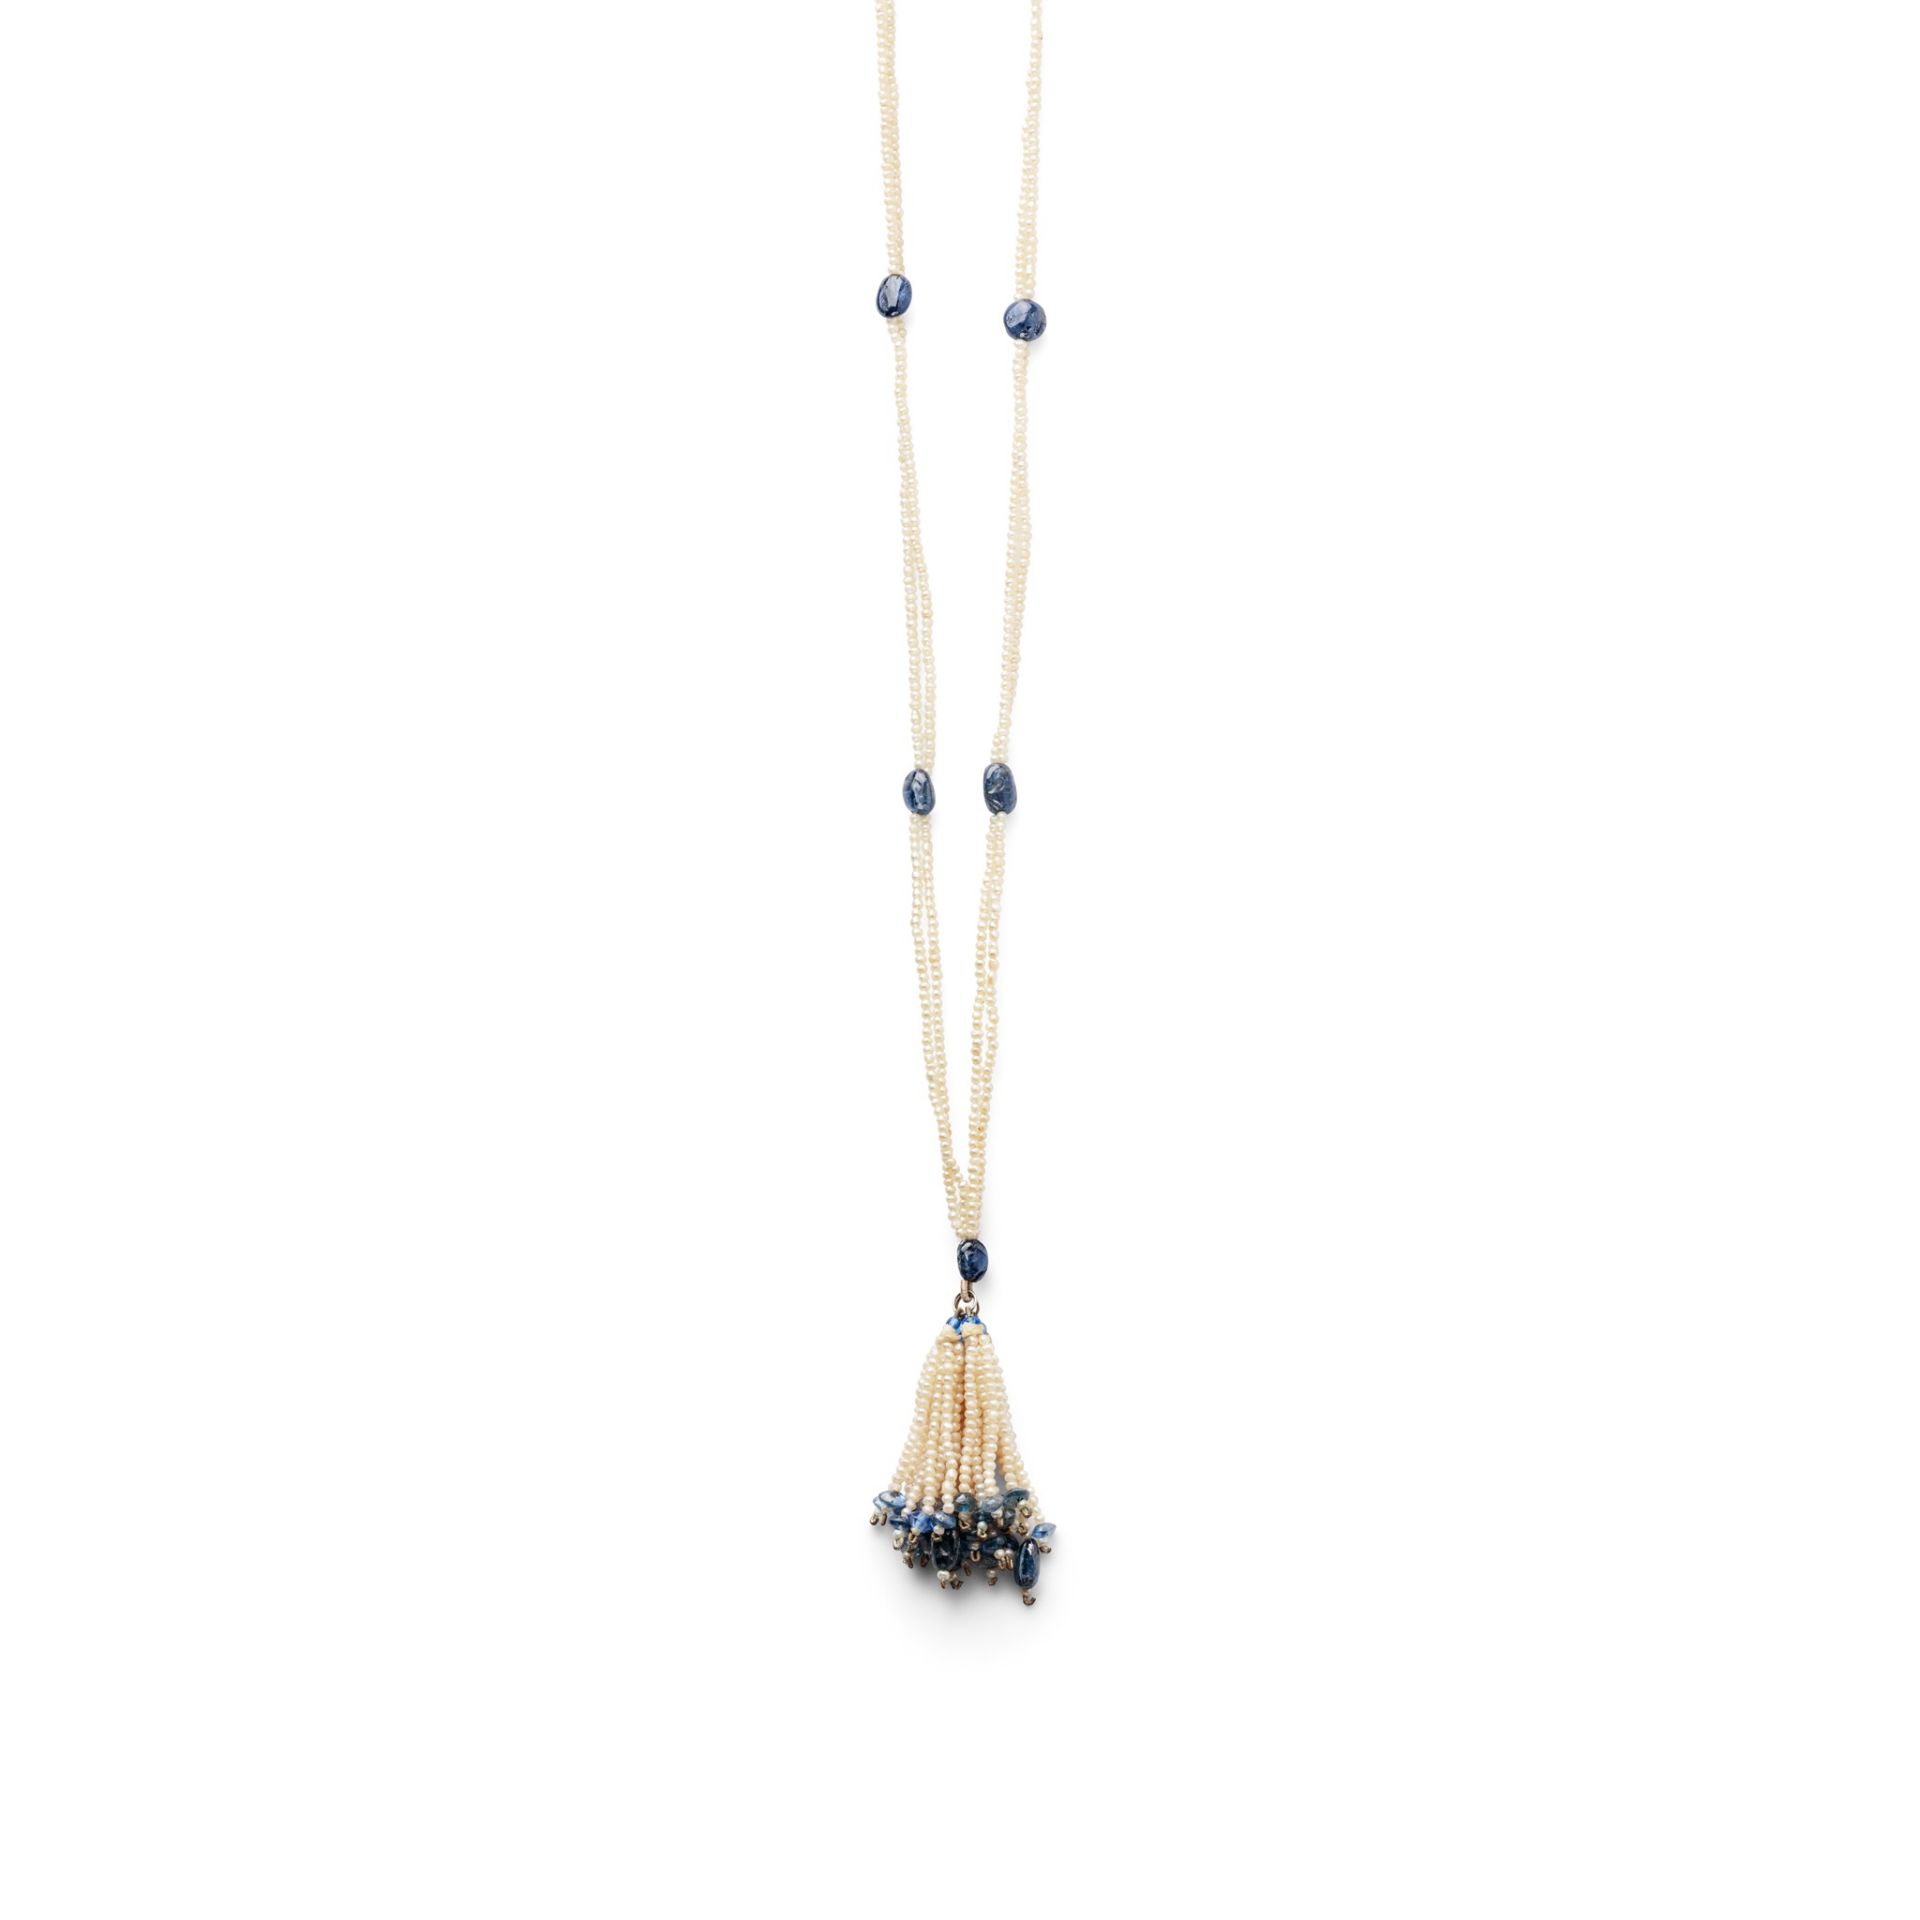 A seed pearl and sapphire bead sautoir Composed of two rows of seed pearls interspersed with